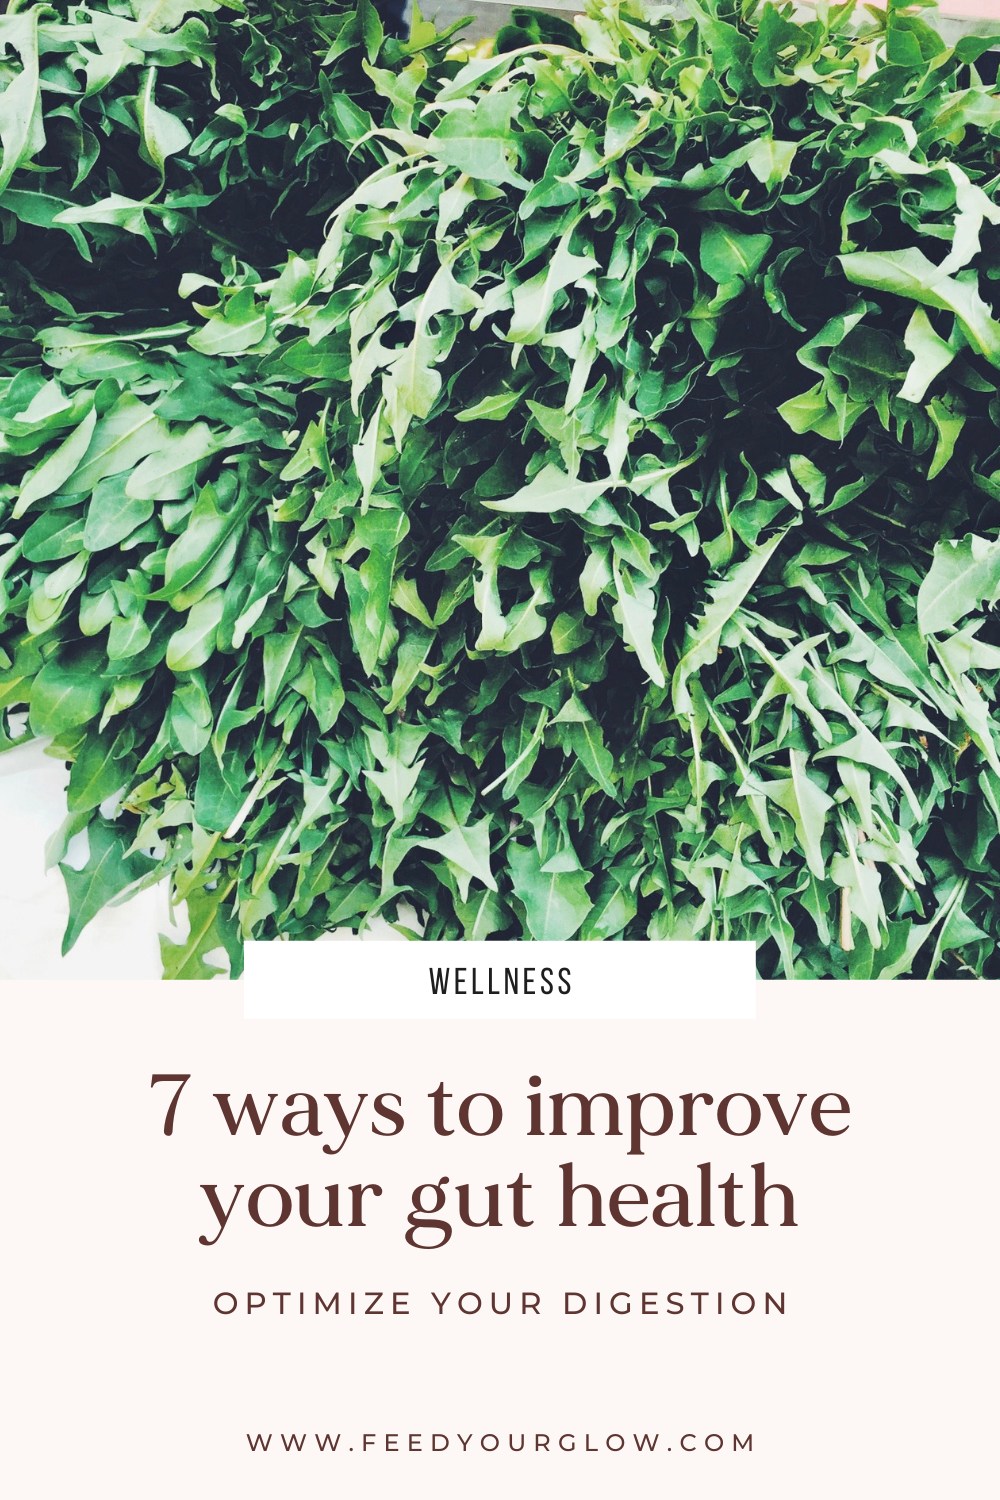 7 Ways to Improve Your Gut Health | Feed Your Glow